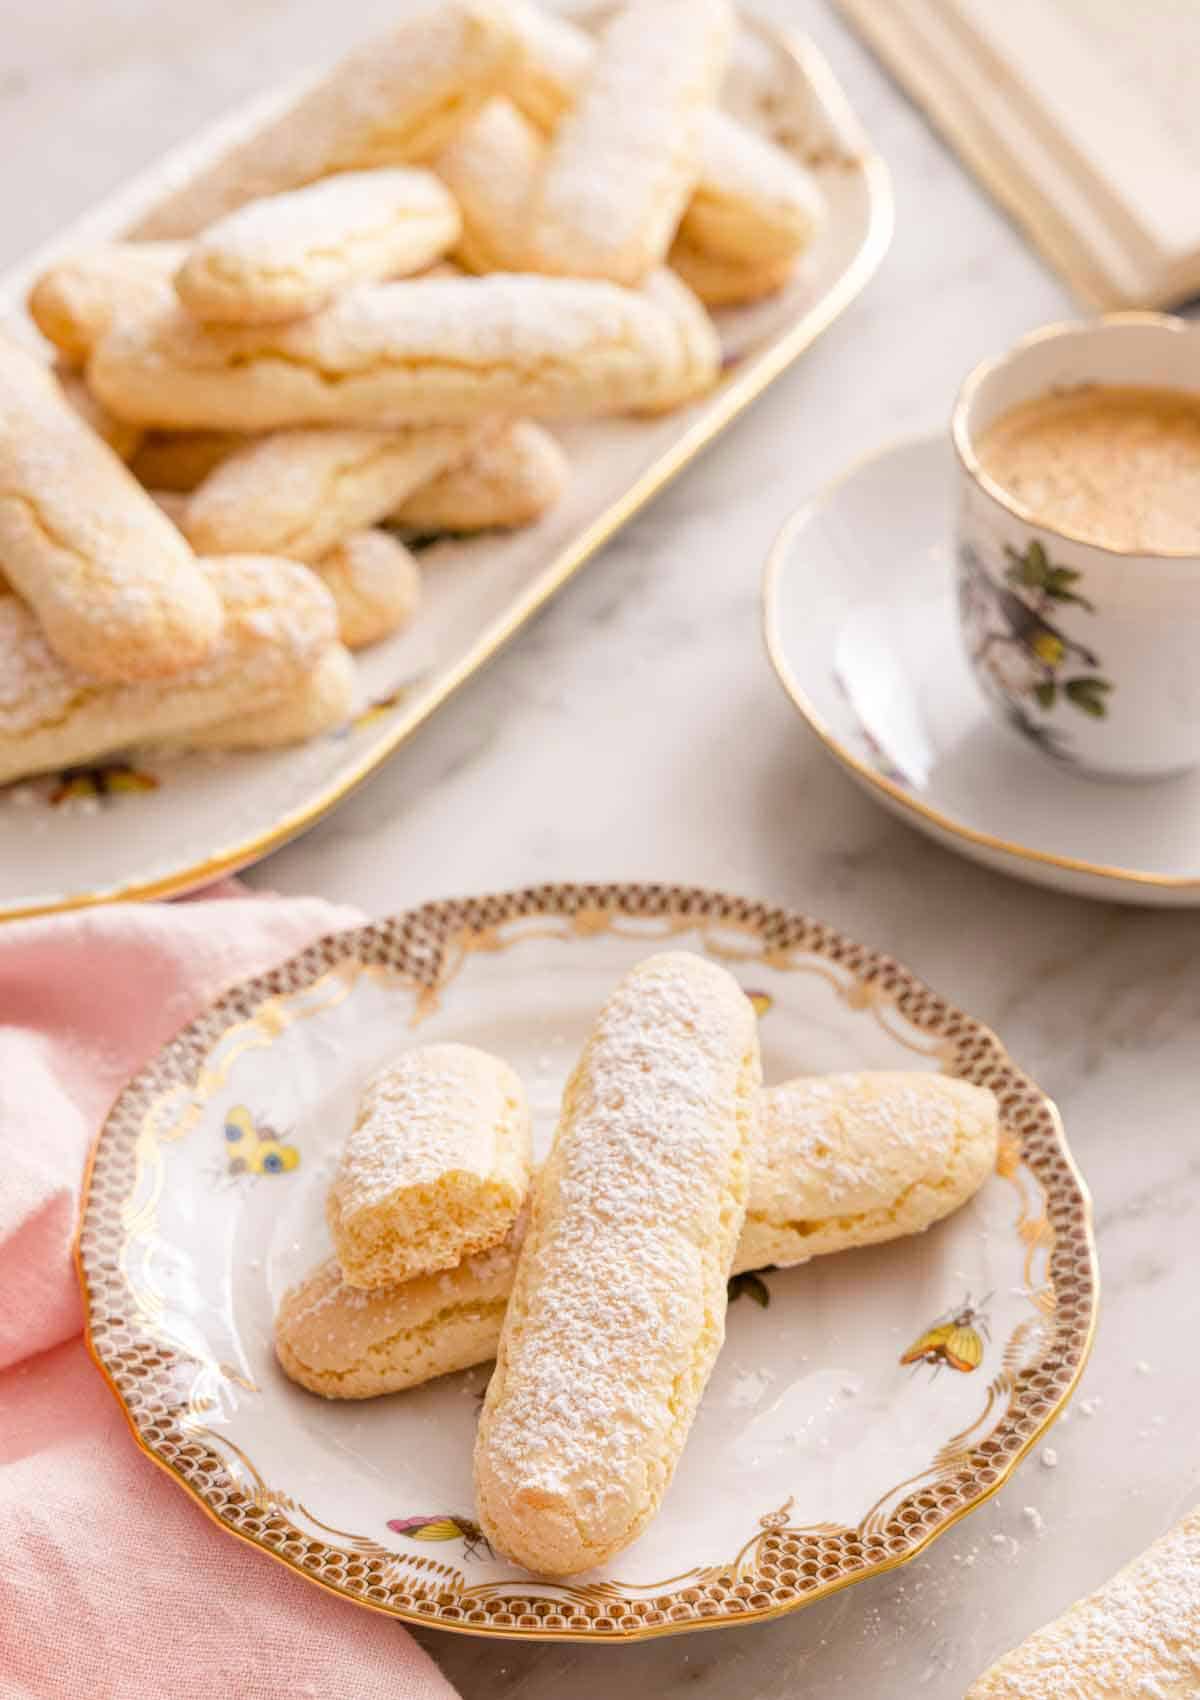 A plate with three ladyfingers with a cup of coffee and a tray of additional ladyfingers in the back.